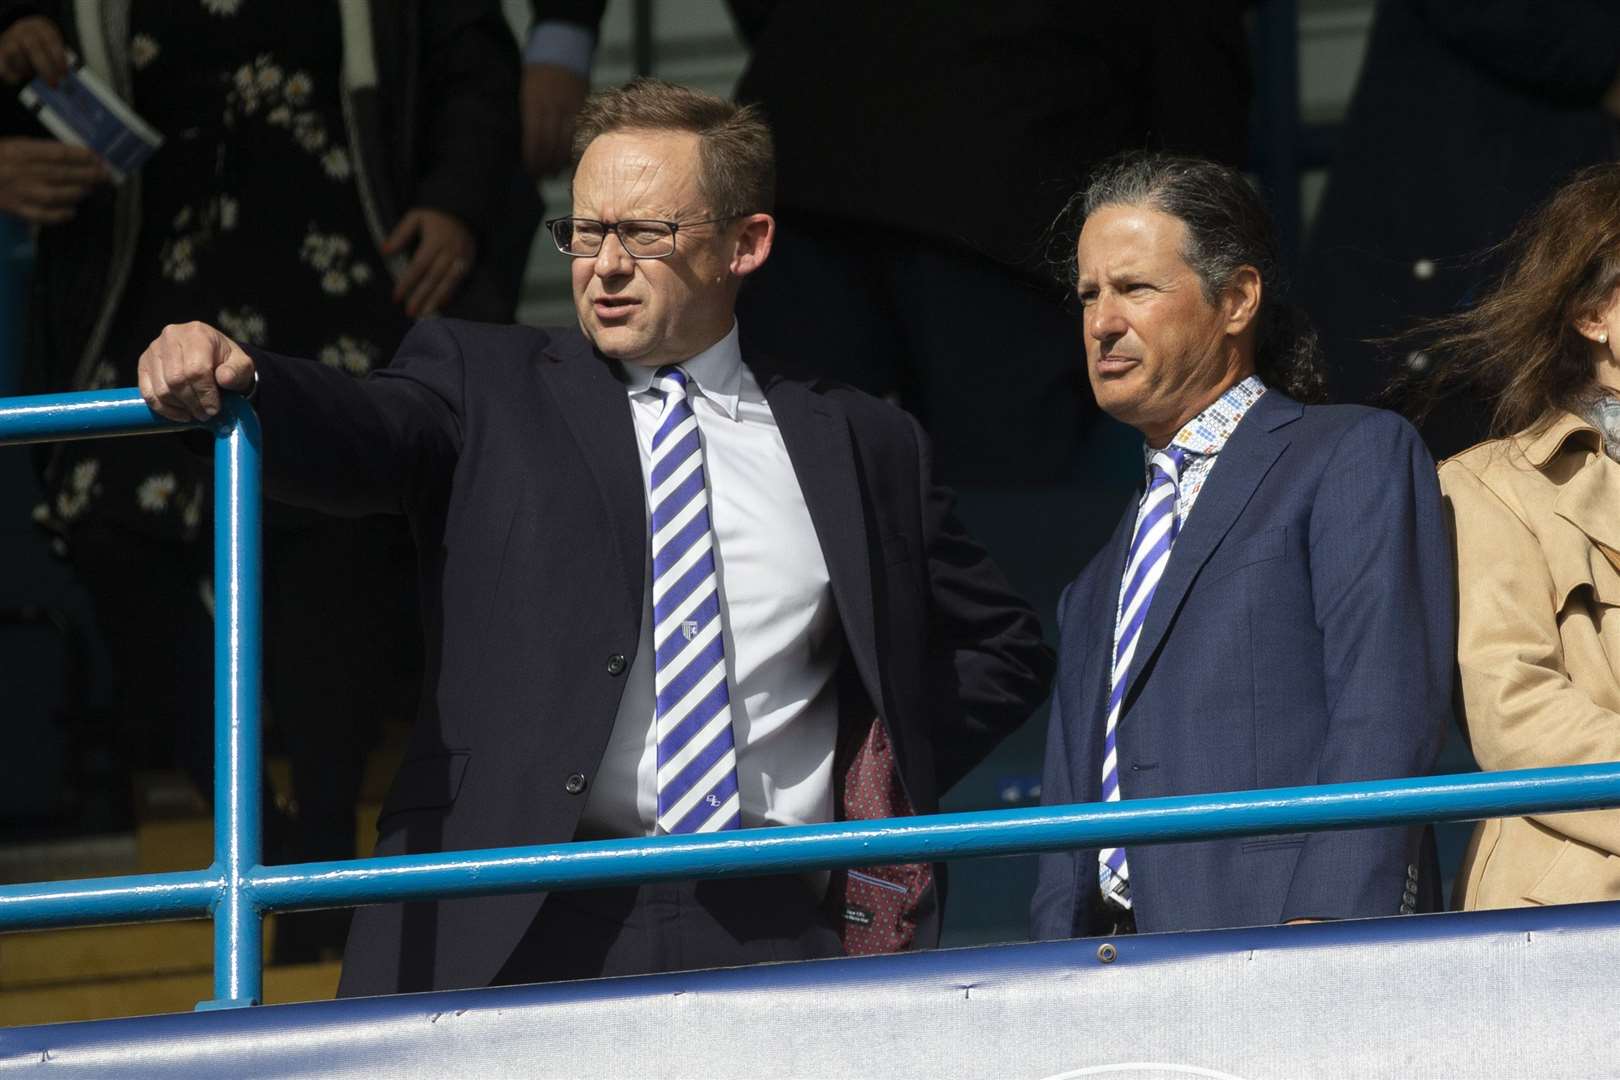 Gillingham's Paul Fisher and owner Brad Galinson have met with Chats boss Kevin Hake as they seek to maintain healthy relations